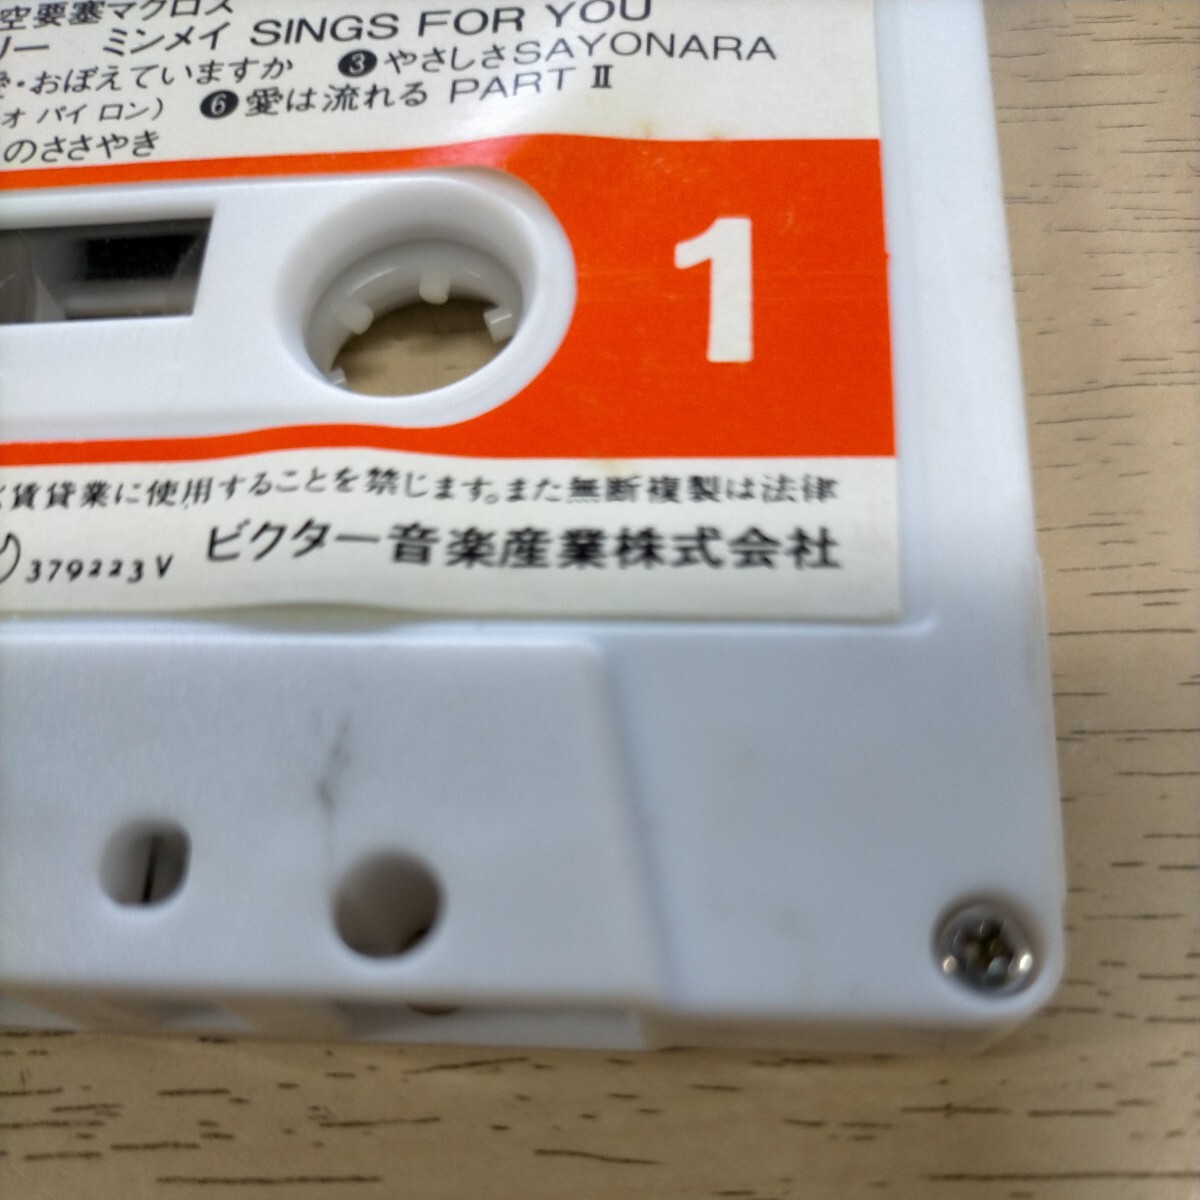  Super Dimension Fortress Macross Iijima Mari SONG memory mimeiSINGS* used / reproduction not yet verification / no claim ./ present condition delivery / condition is photograph .. please verify /VCK-6186